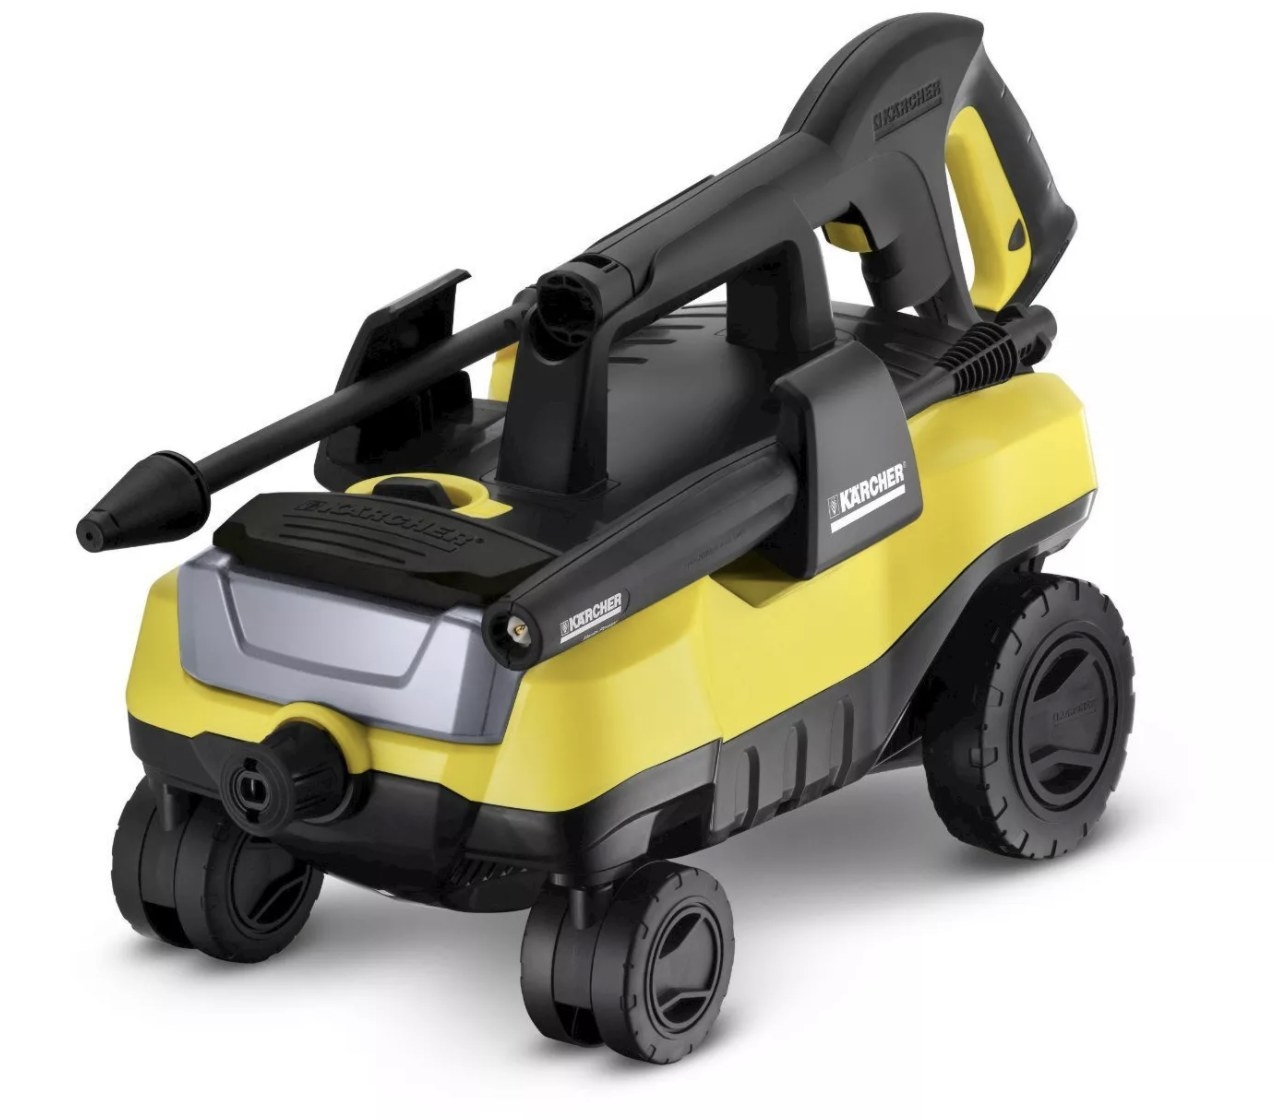 A black-and-yellow power washer with four wheels 